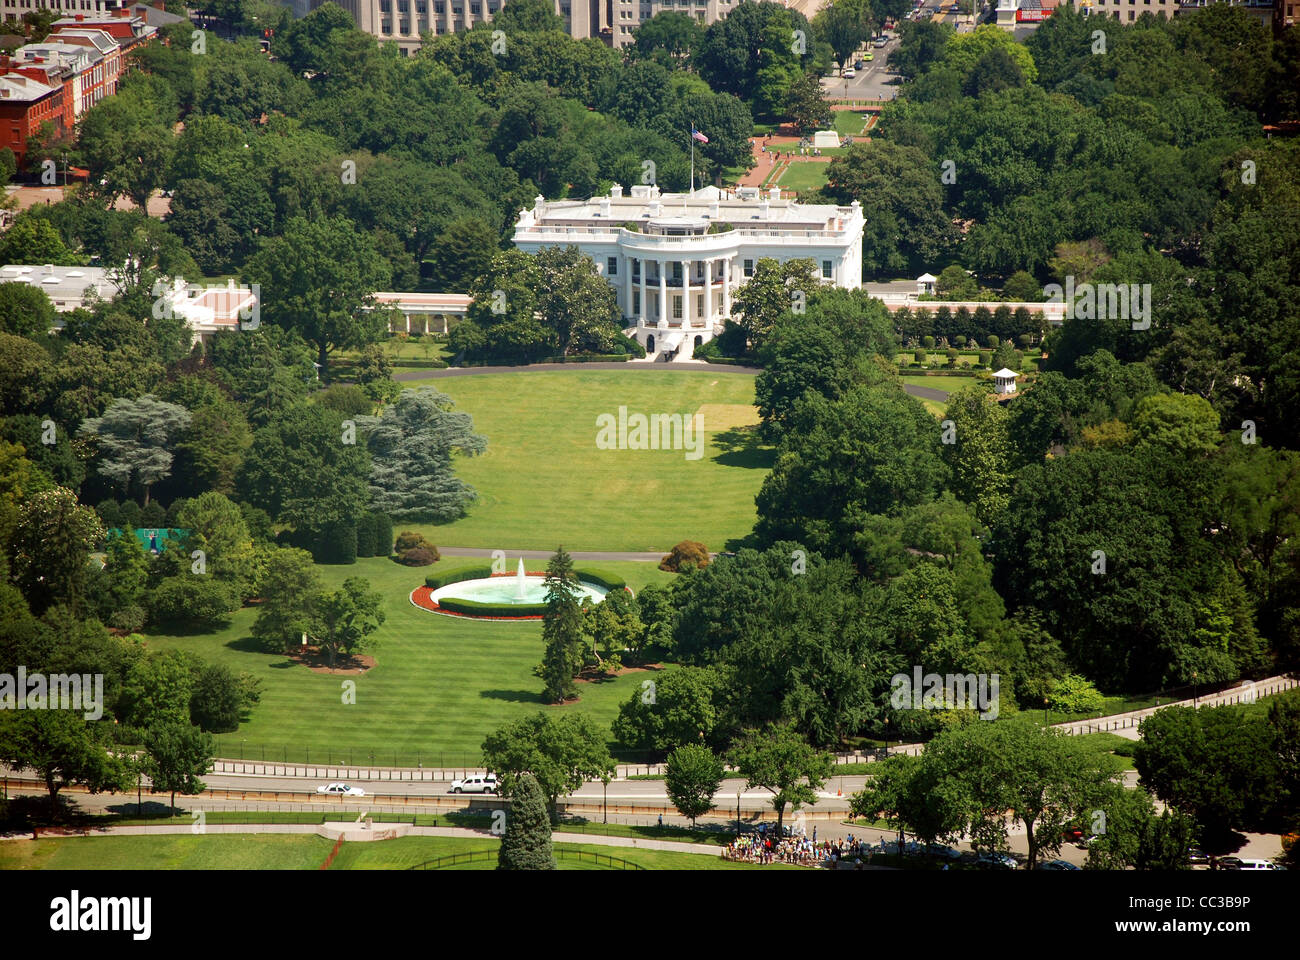 Aerial view of The White house in Washington DC from Washington Monument Stock Photo